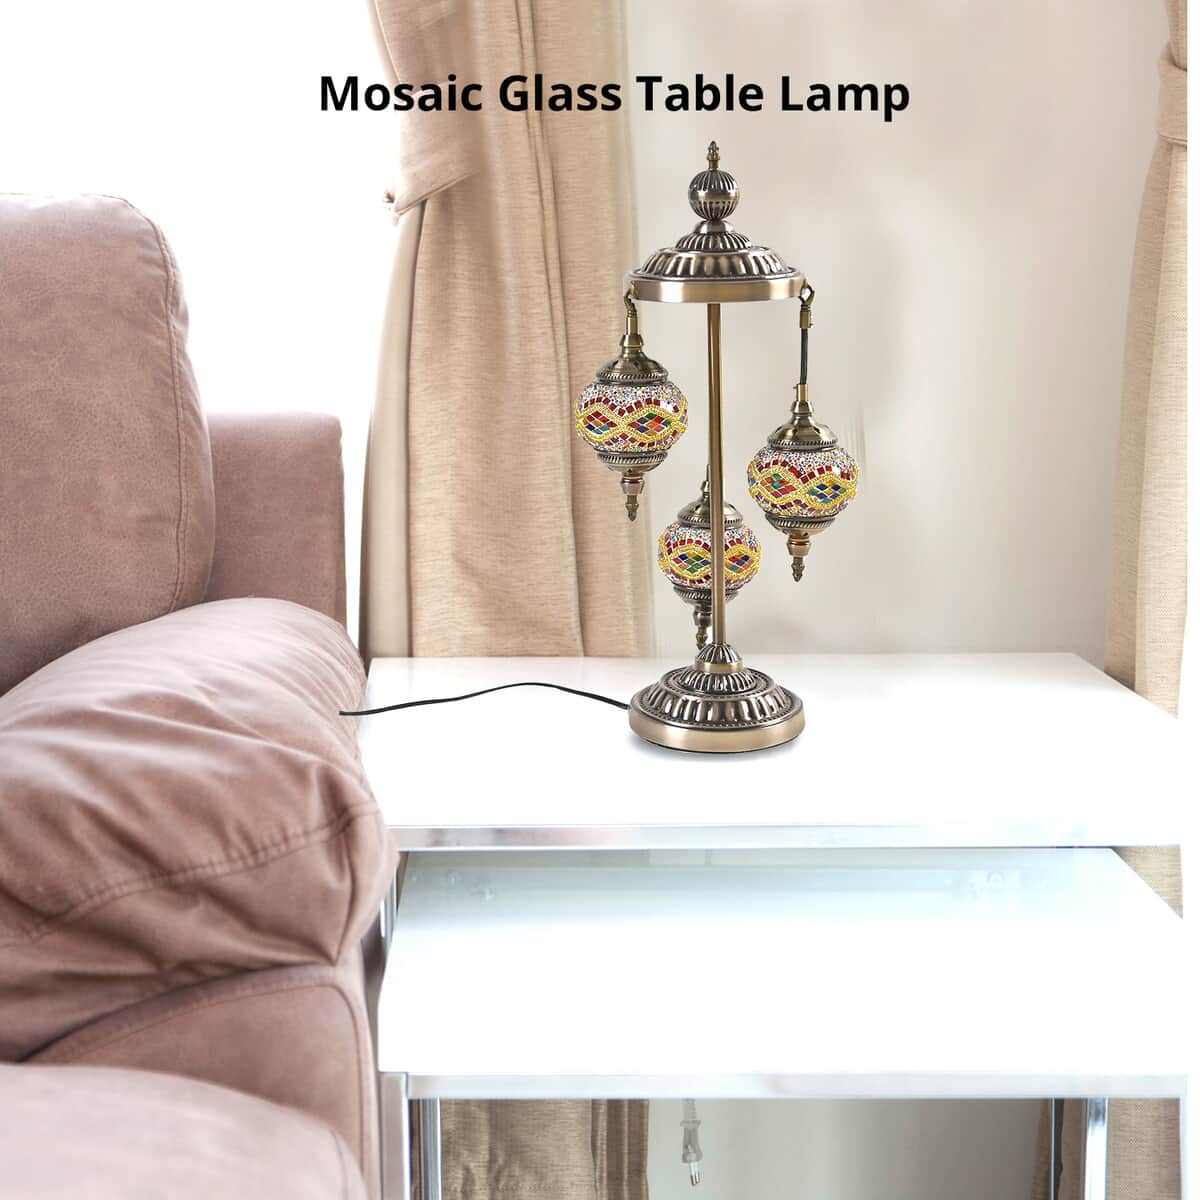 3 Globe Mosaic Glass Handmade Antique Turkish Lamp with Bronze Base, Multi-purpose Use(Bedside,Indoor), Colorful Stained Glass Lantern image number 1